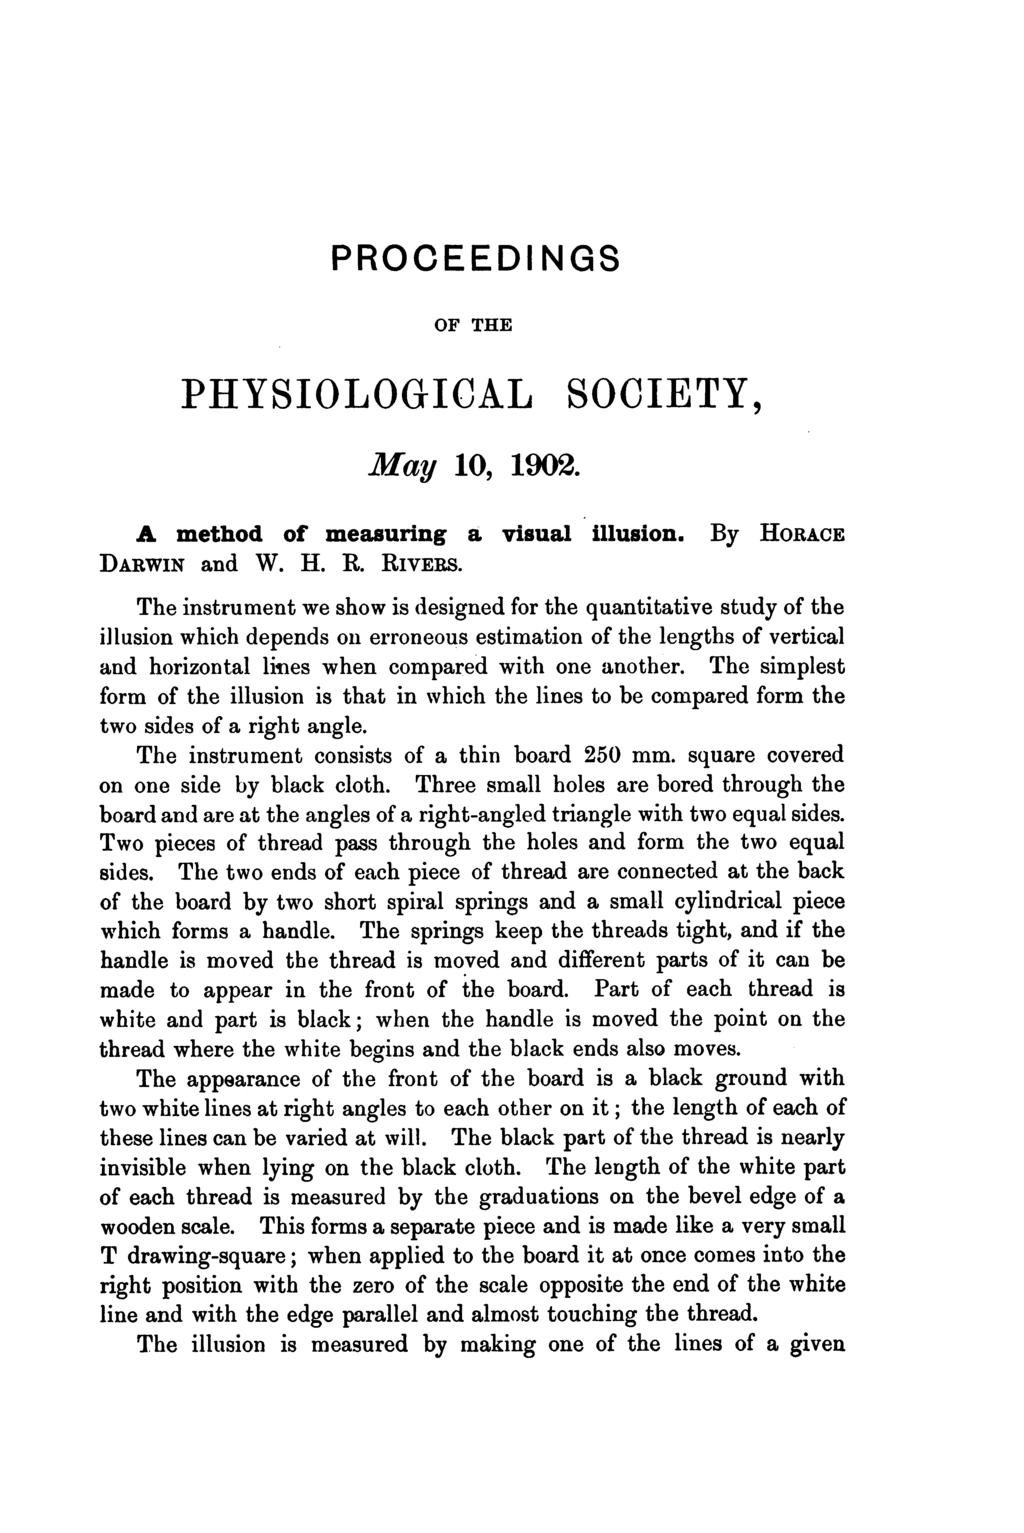 PROCEEDI NGS OF THE PHYSIOLOGICAL May 10, 1902. SOCIETY, A method of measuring a visual illusion. By HORACE DARWIN and W. H. R. RIVERS.